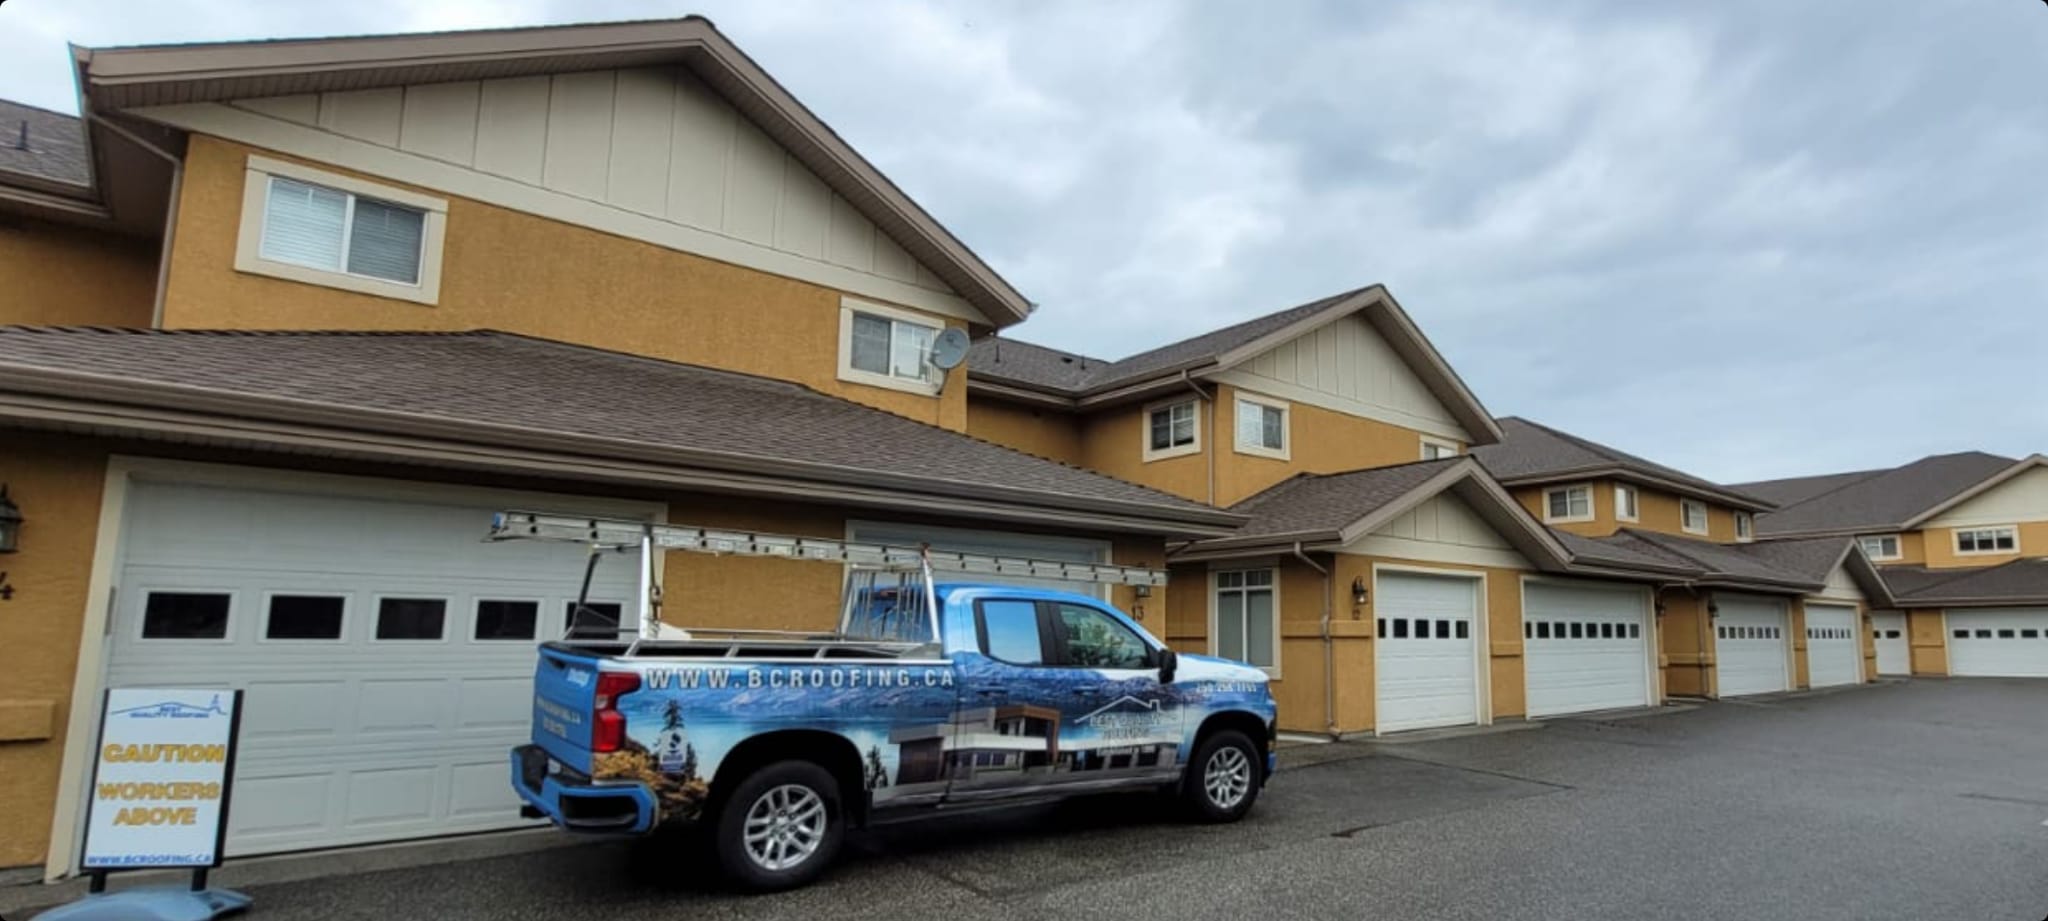 BQR Roofing in Lake Country of the Okanagan